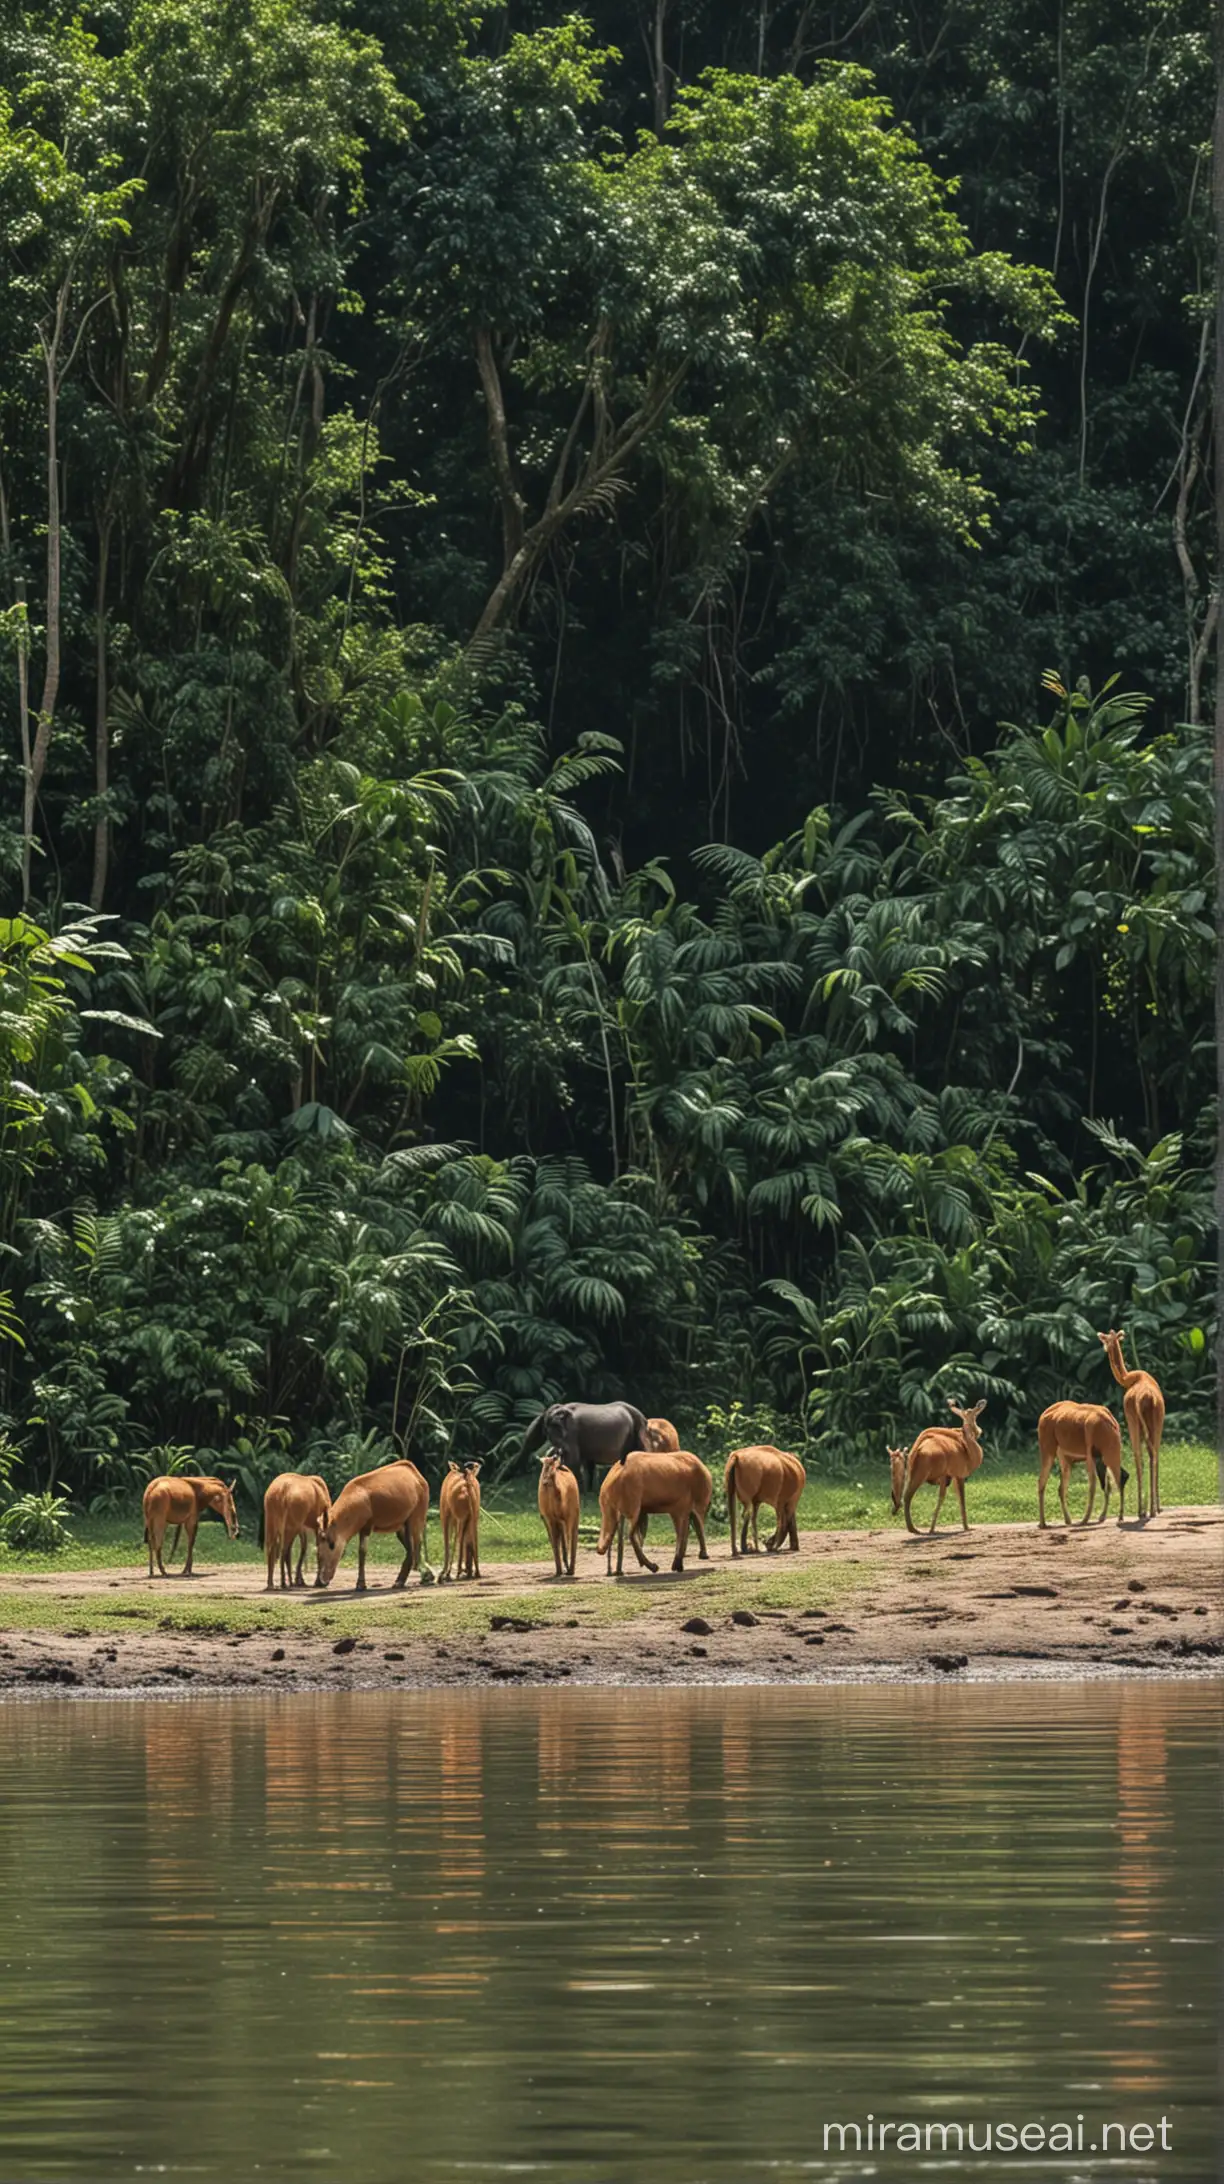 view of the Amazon animals seen from close